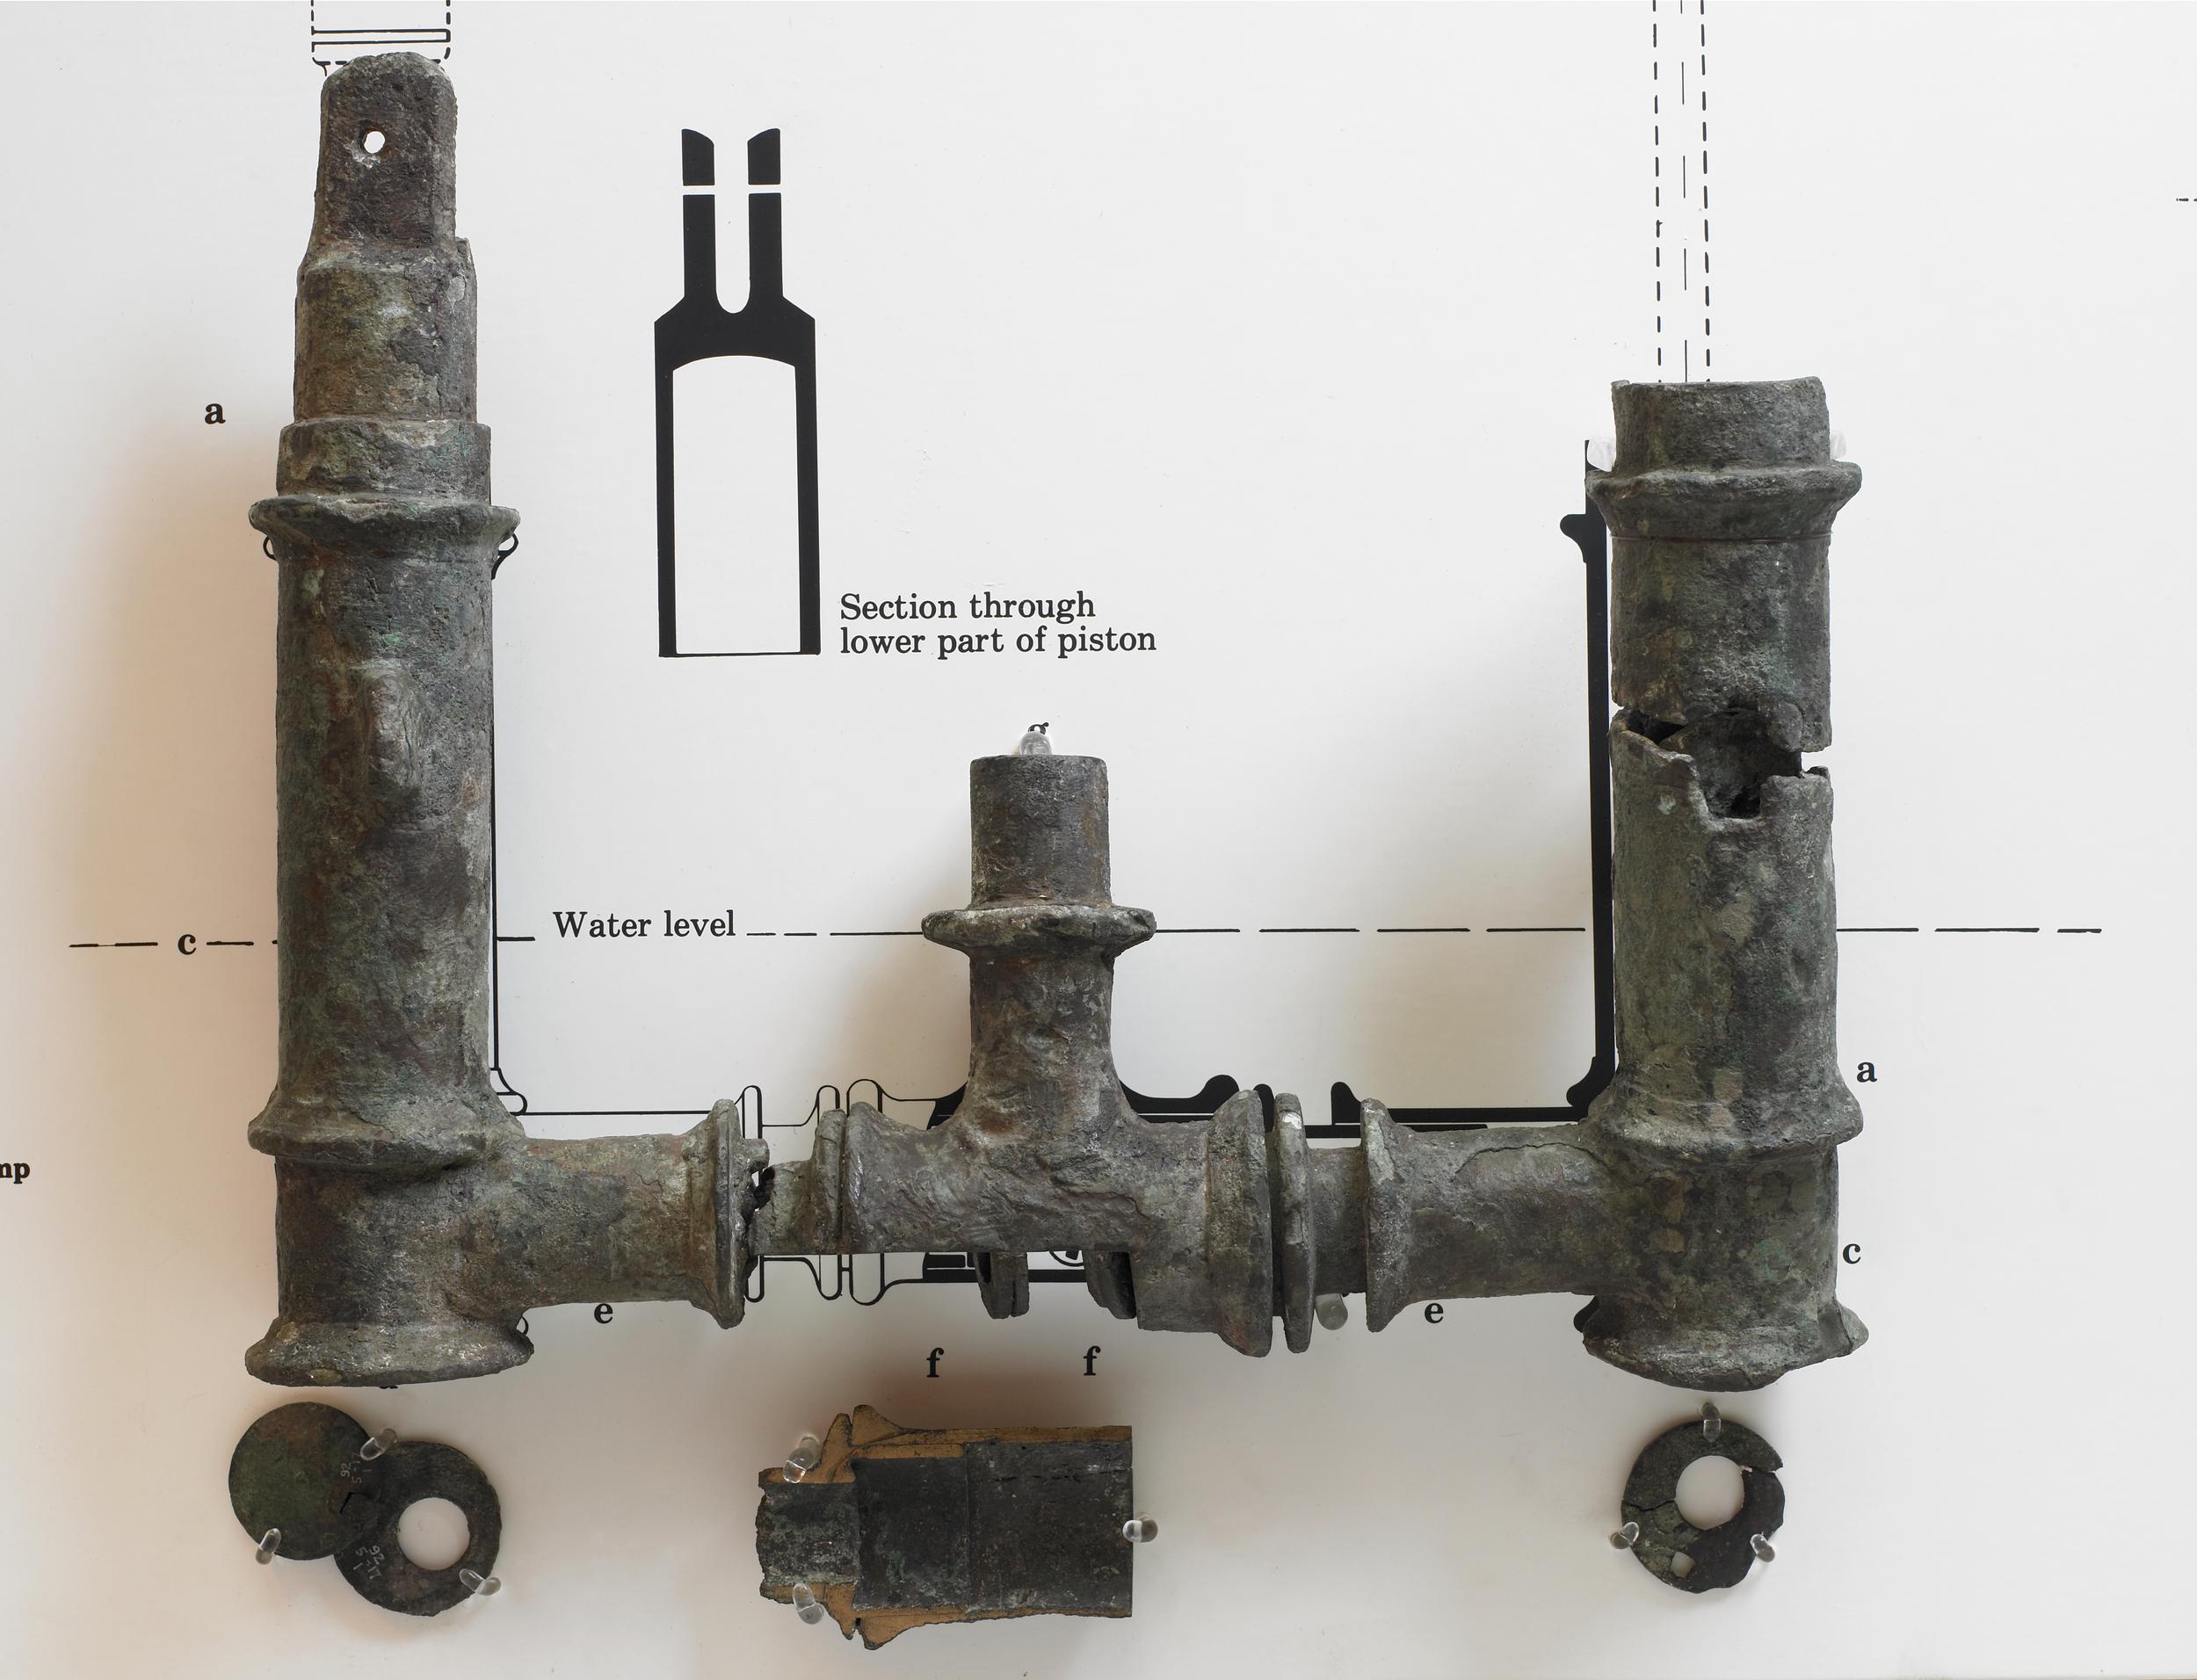 ancient Roman bronze double-action water pump with one barrel and a semicircular bracket, around 3rd century AD. Excavated in Bolsena, Italy. Now housed in the British Museum.jpg